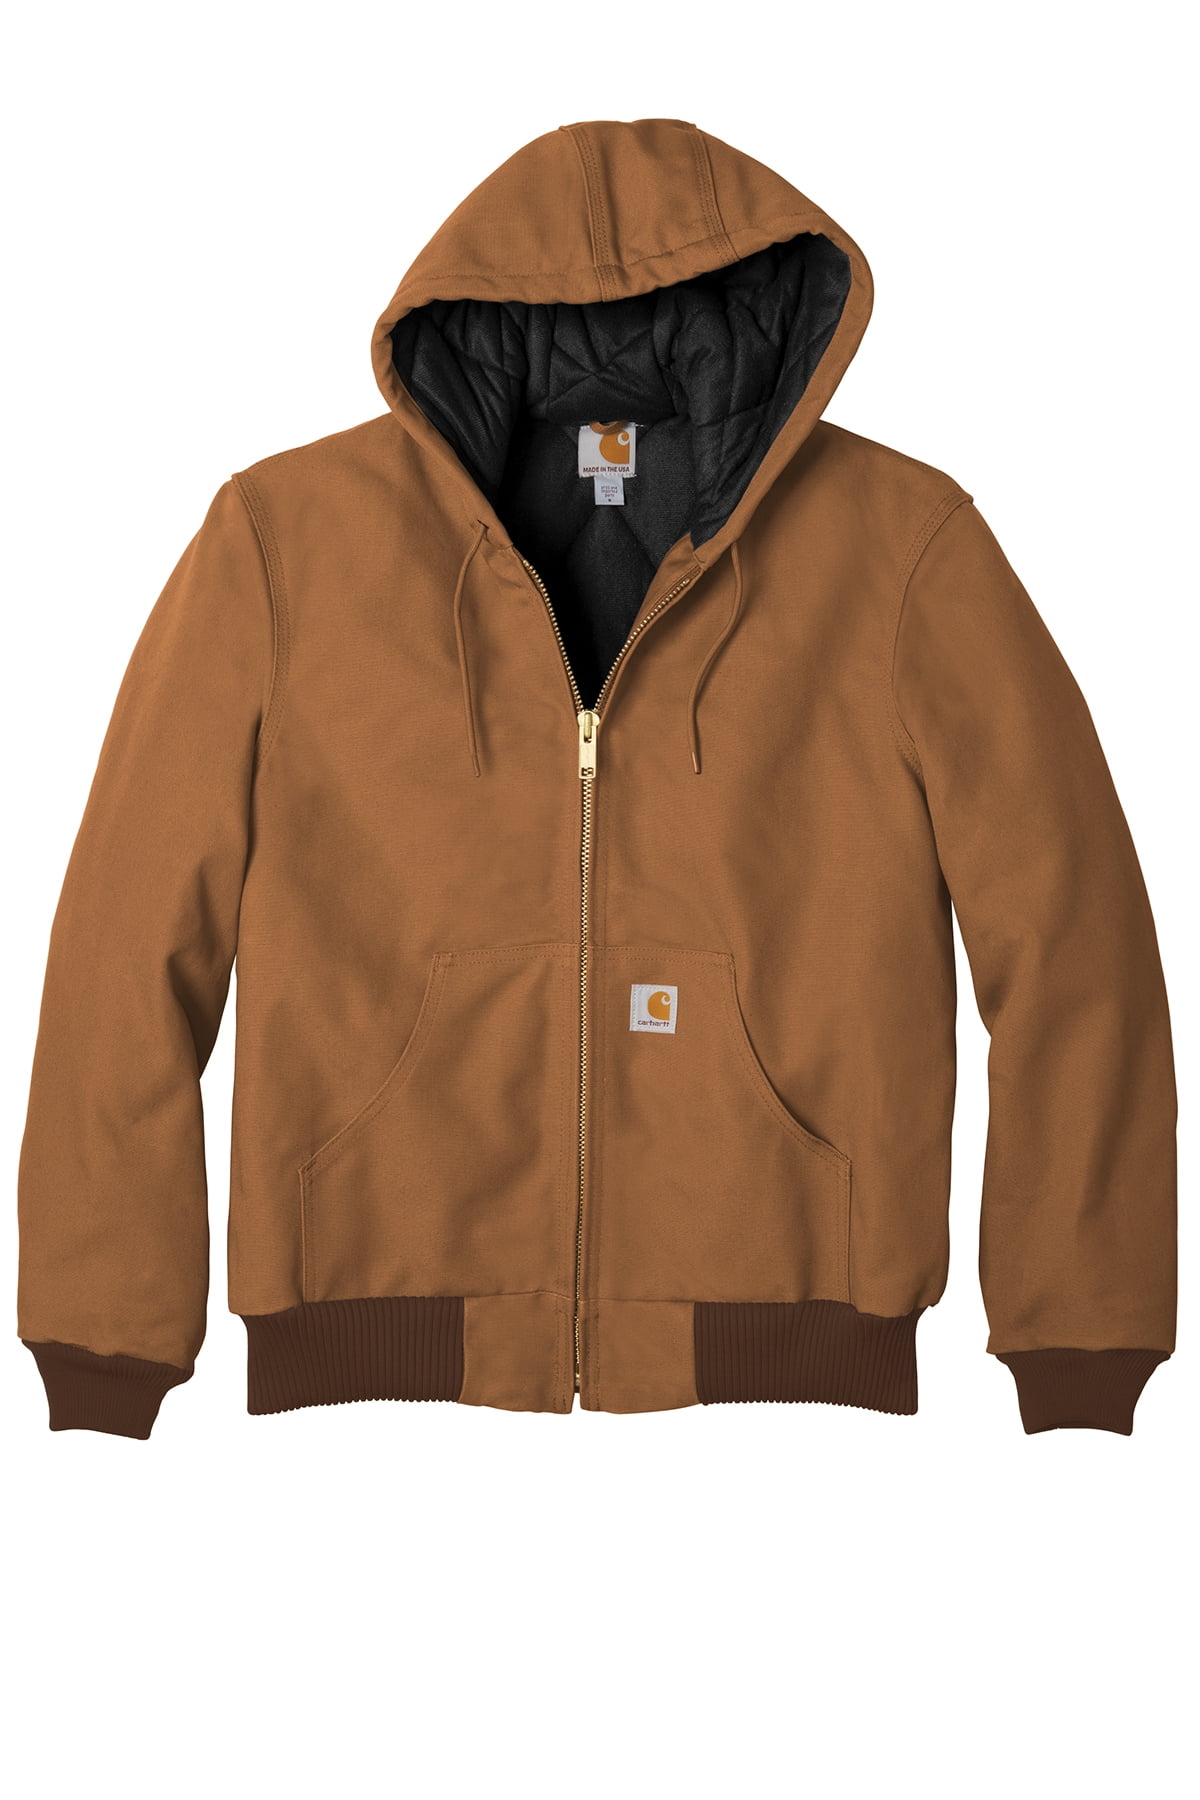 Carhartt Men's J140 Quilted-Flannel-Lined Hooded Duck Active